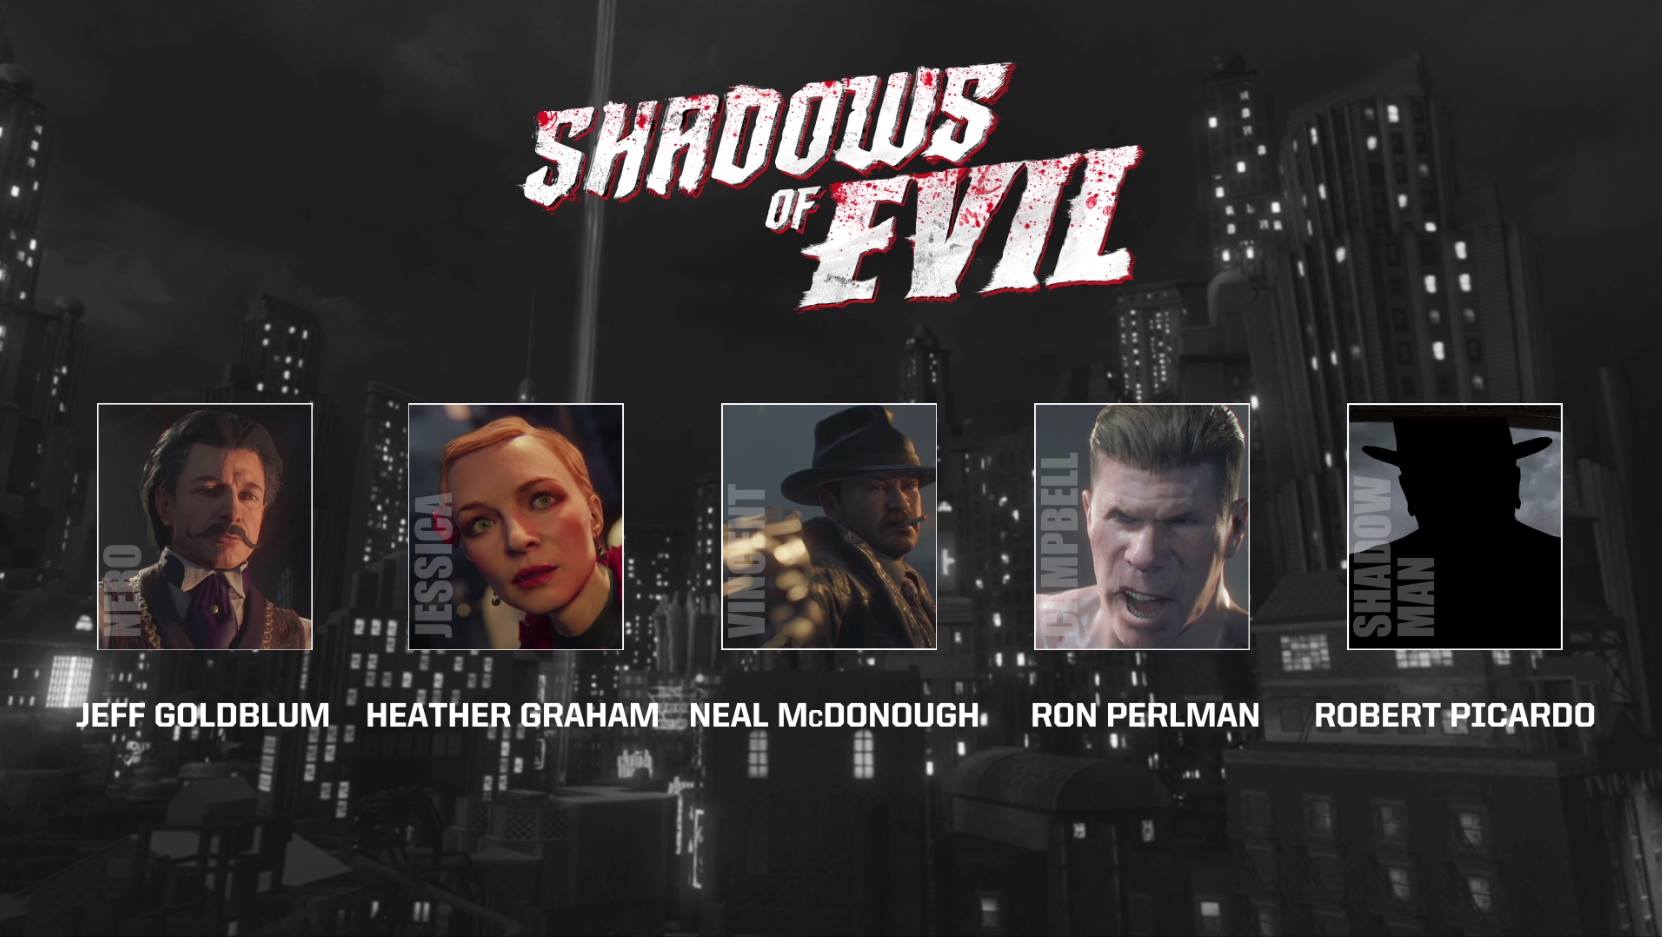 cod black ops 3 zombies shadows of evil